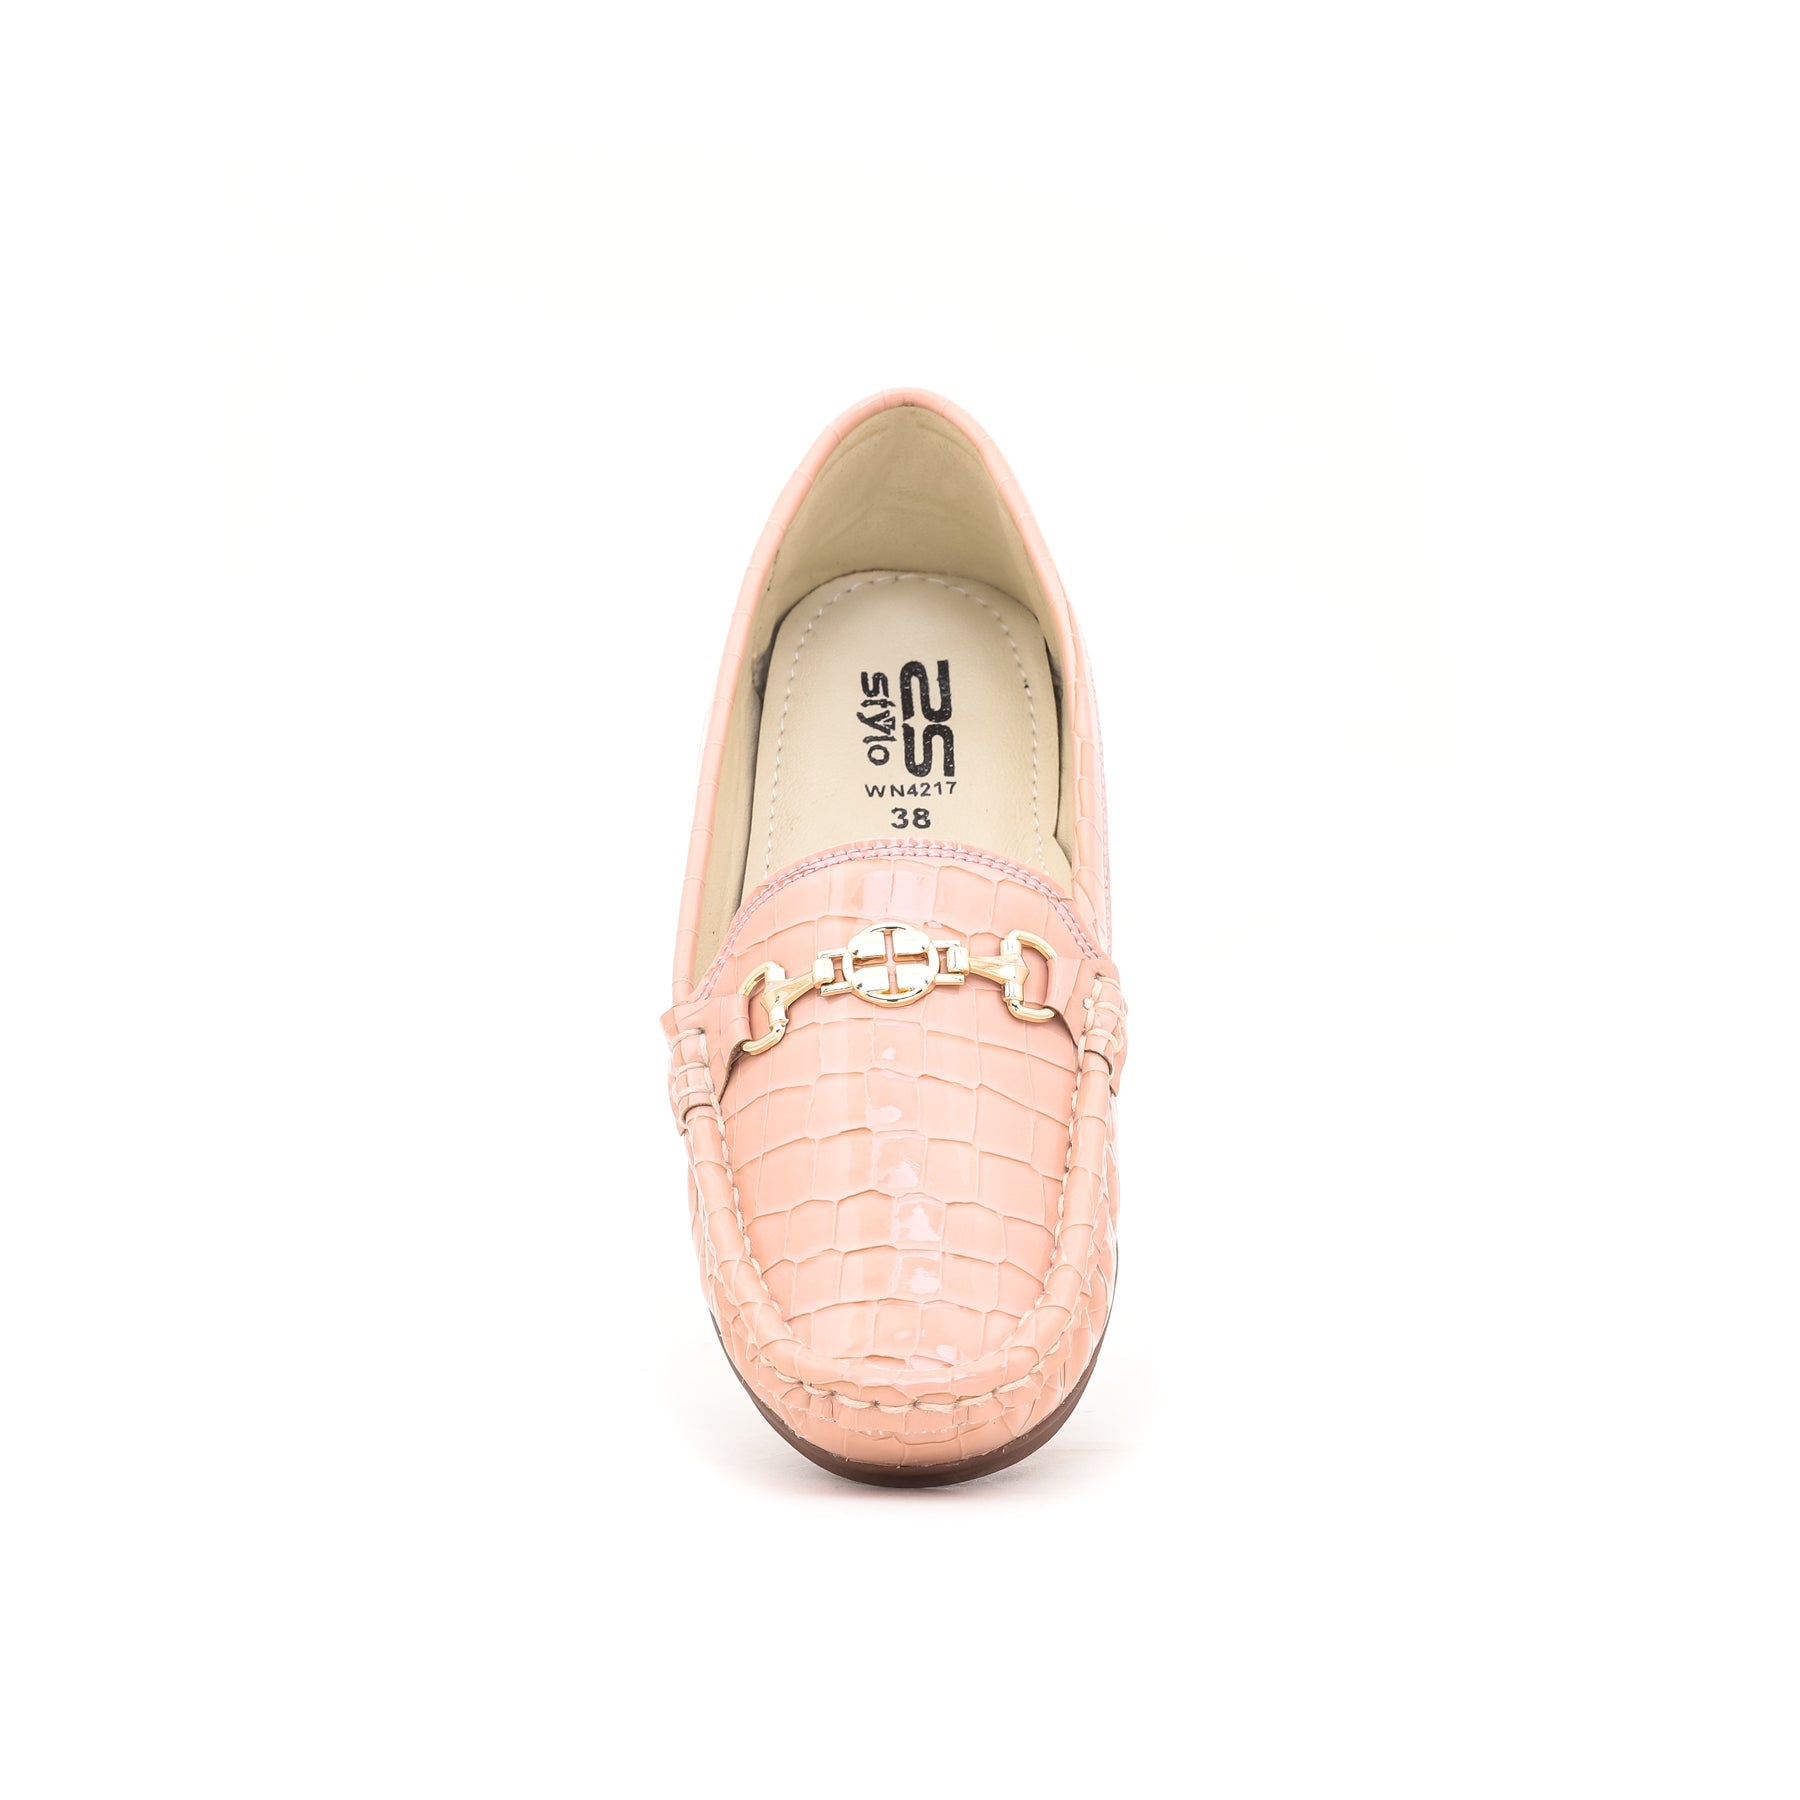 Pink Winter Moccasin WN4217